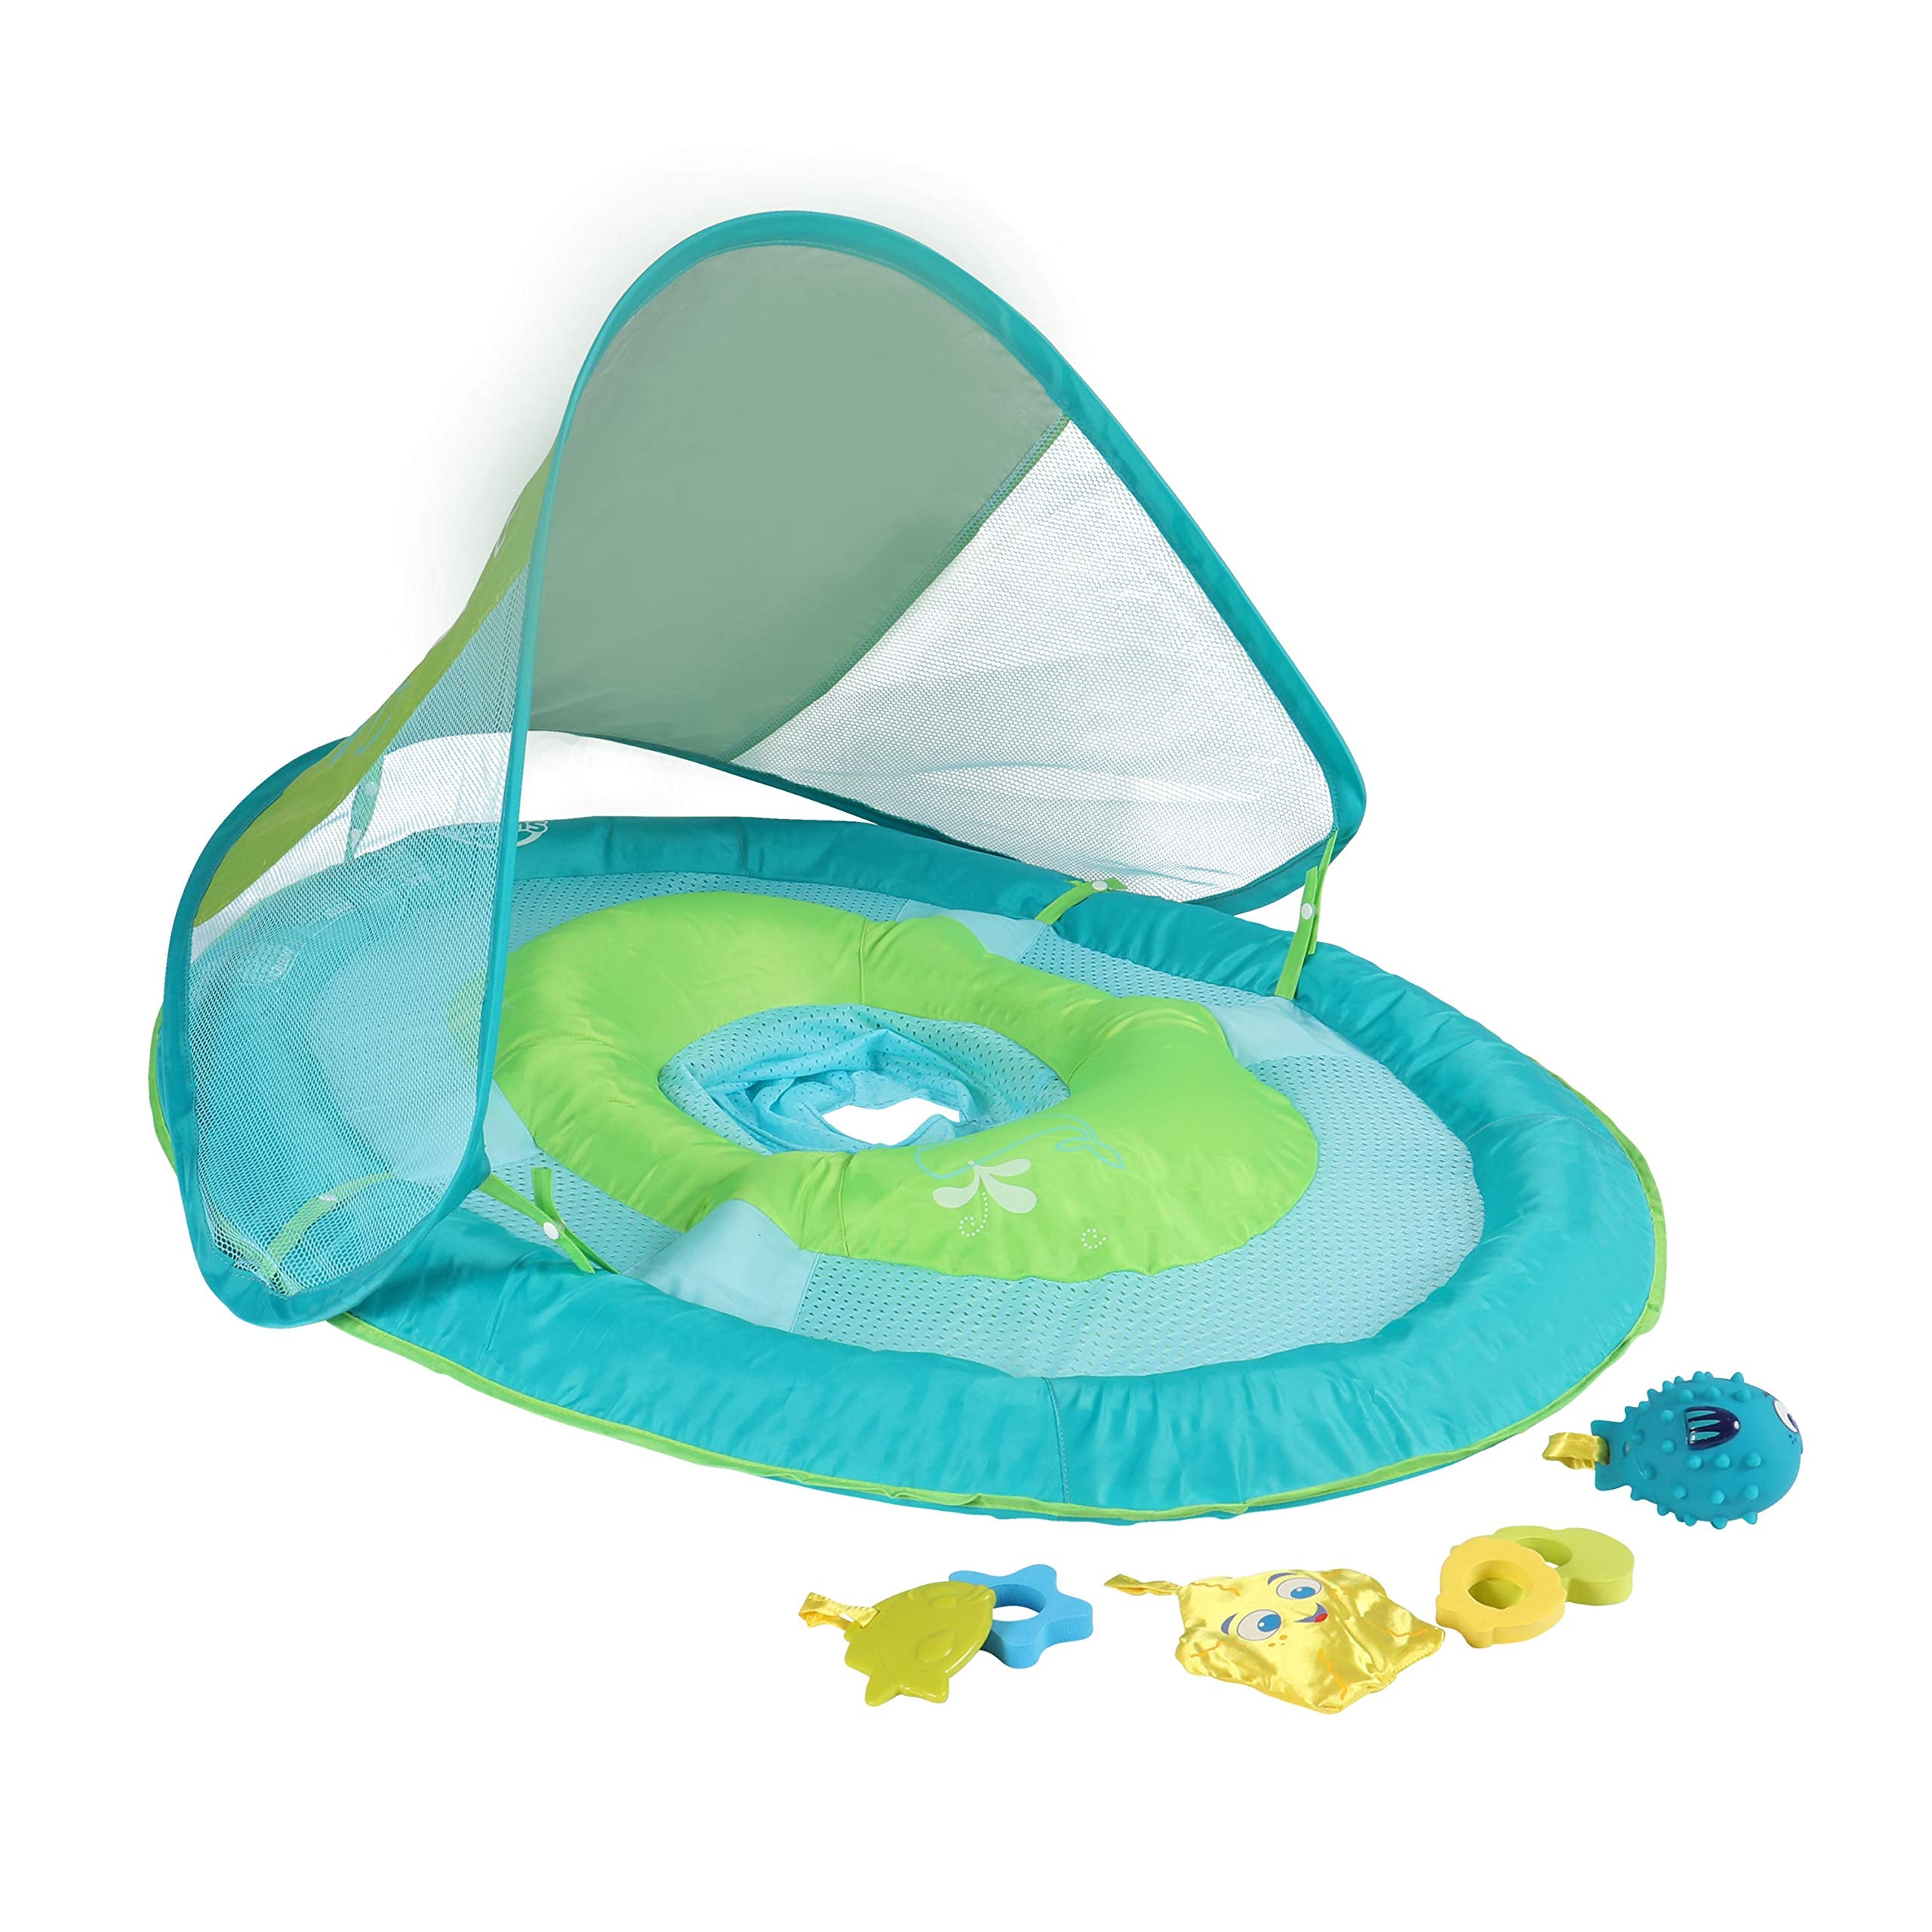 SwimWays Baby Spring Float with Canopy - Inflatable Float for Children with Detached Floating Toys and UPF Sun Protection - Aqua/Green